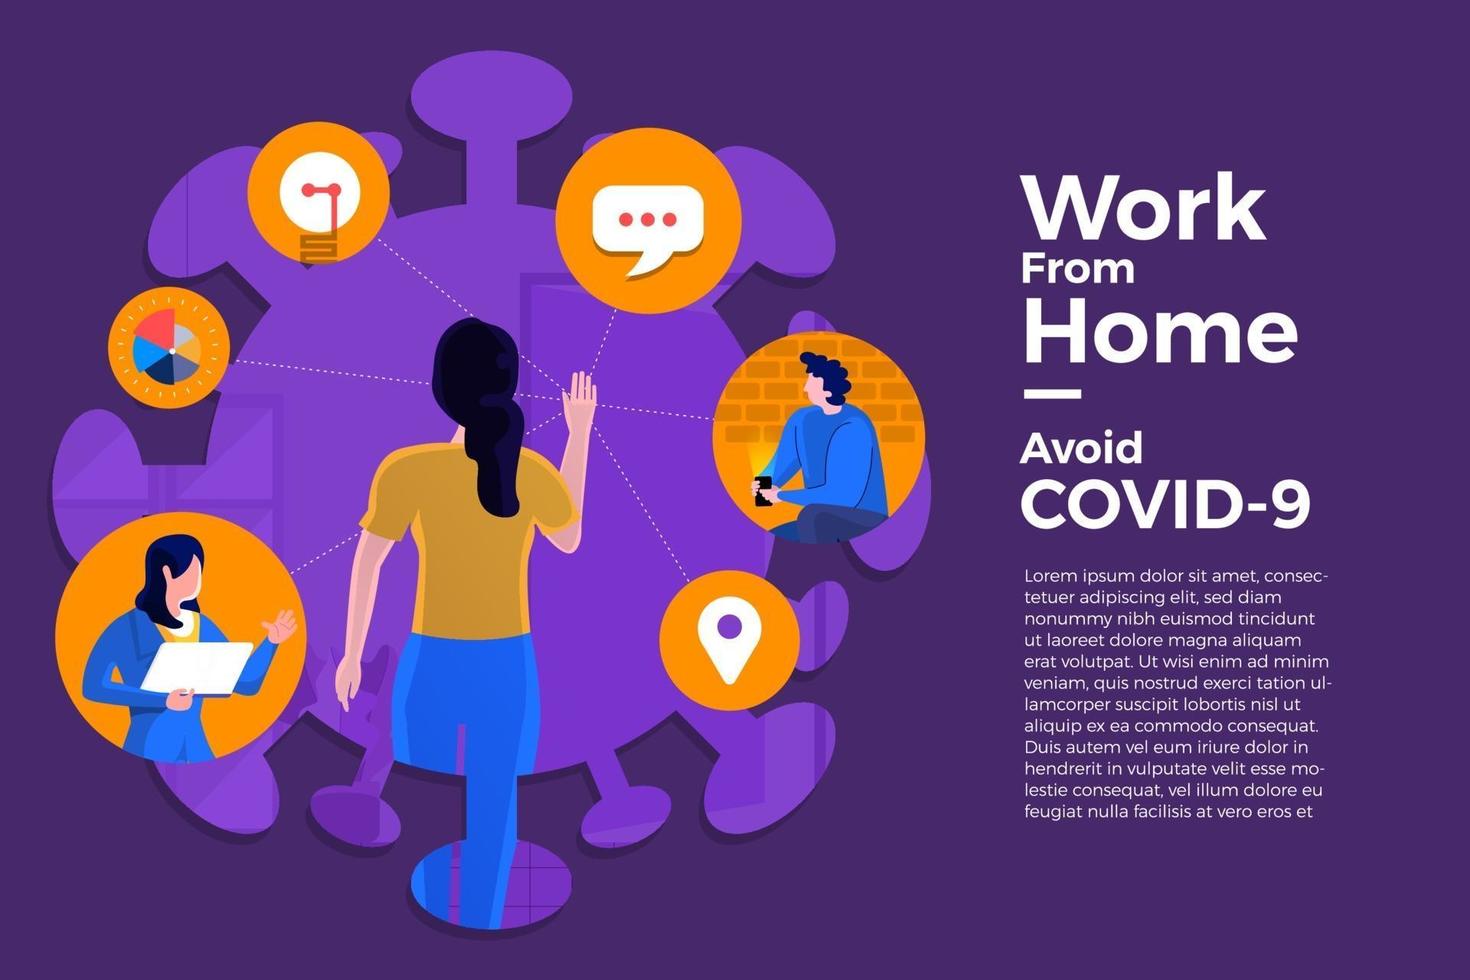 Coronavirus COVID-19. The company allows employees to work from home to avoid viruses. vector